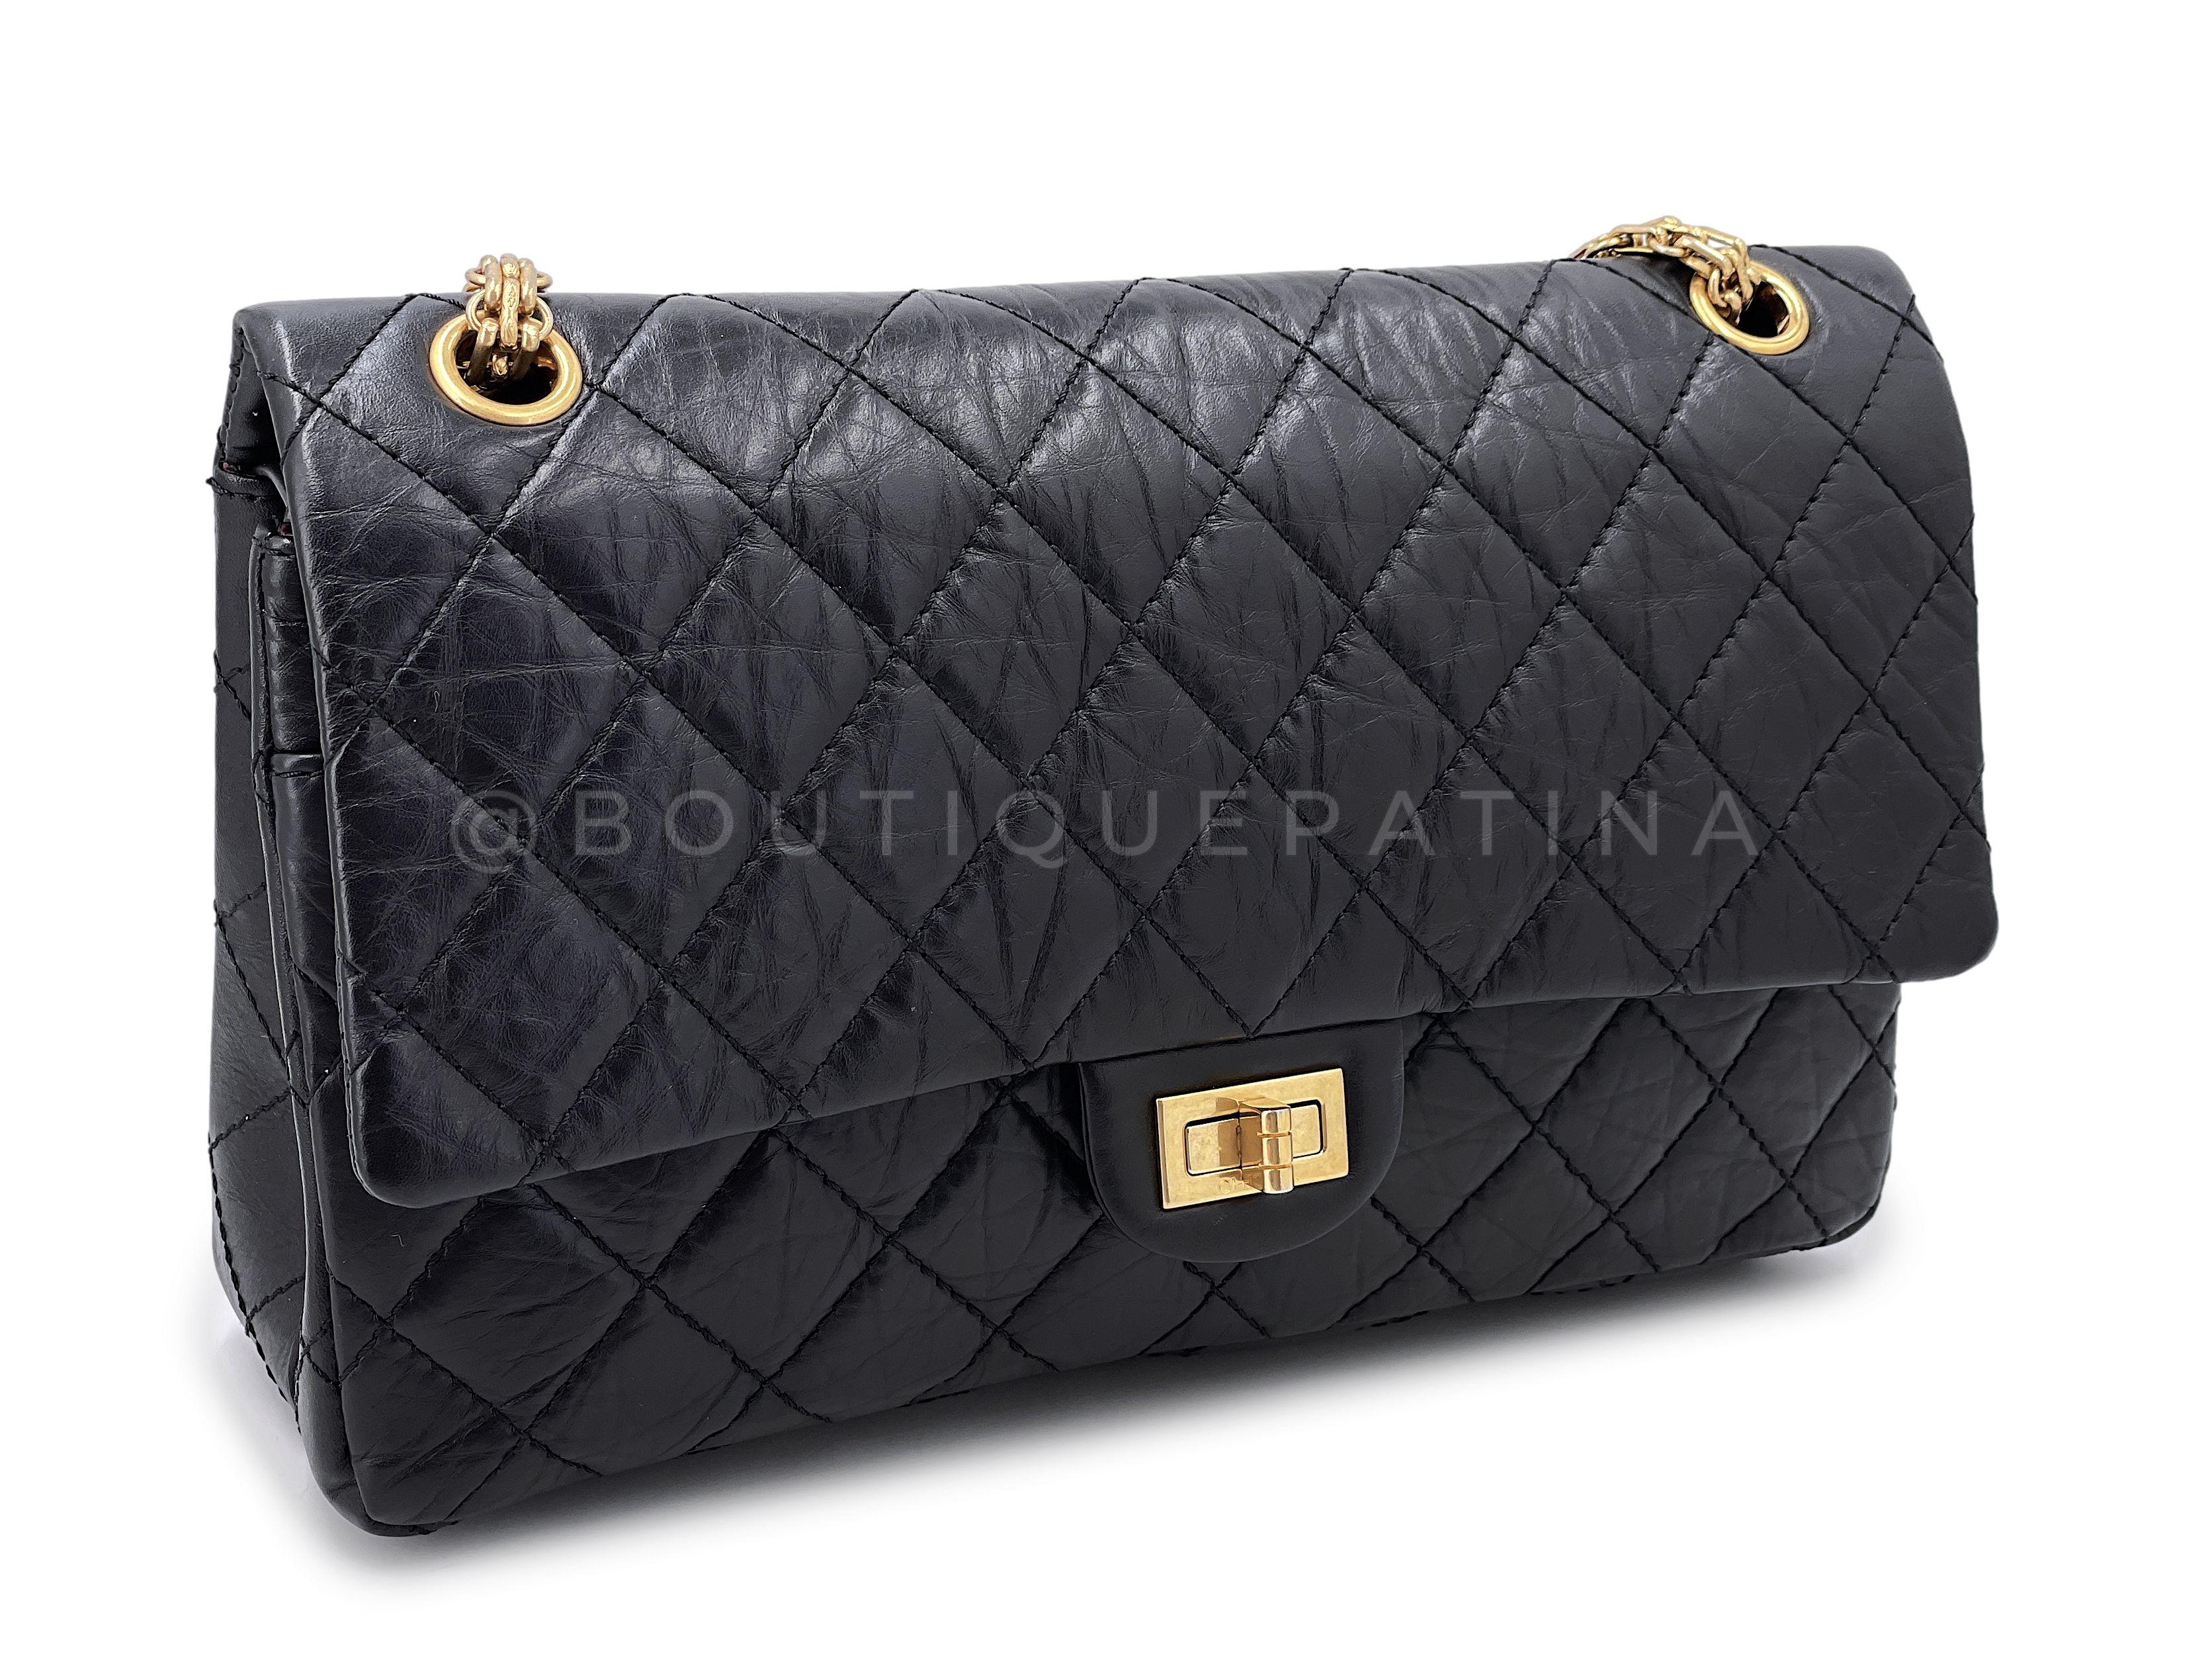 Chanel Black Aged Calfskin Reissue Medium 226 2.55 Flap Bag GHW 66864 In Excellent Condition For Sale In Costa Mesa, CA